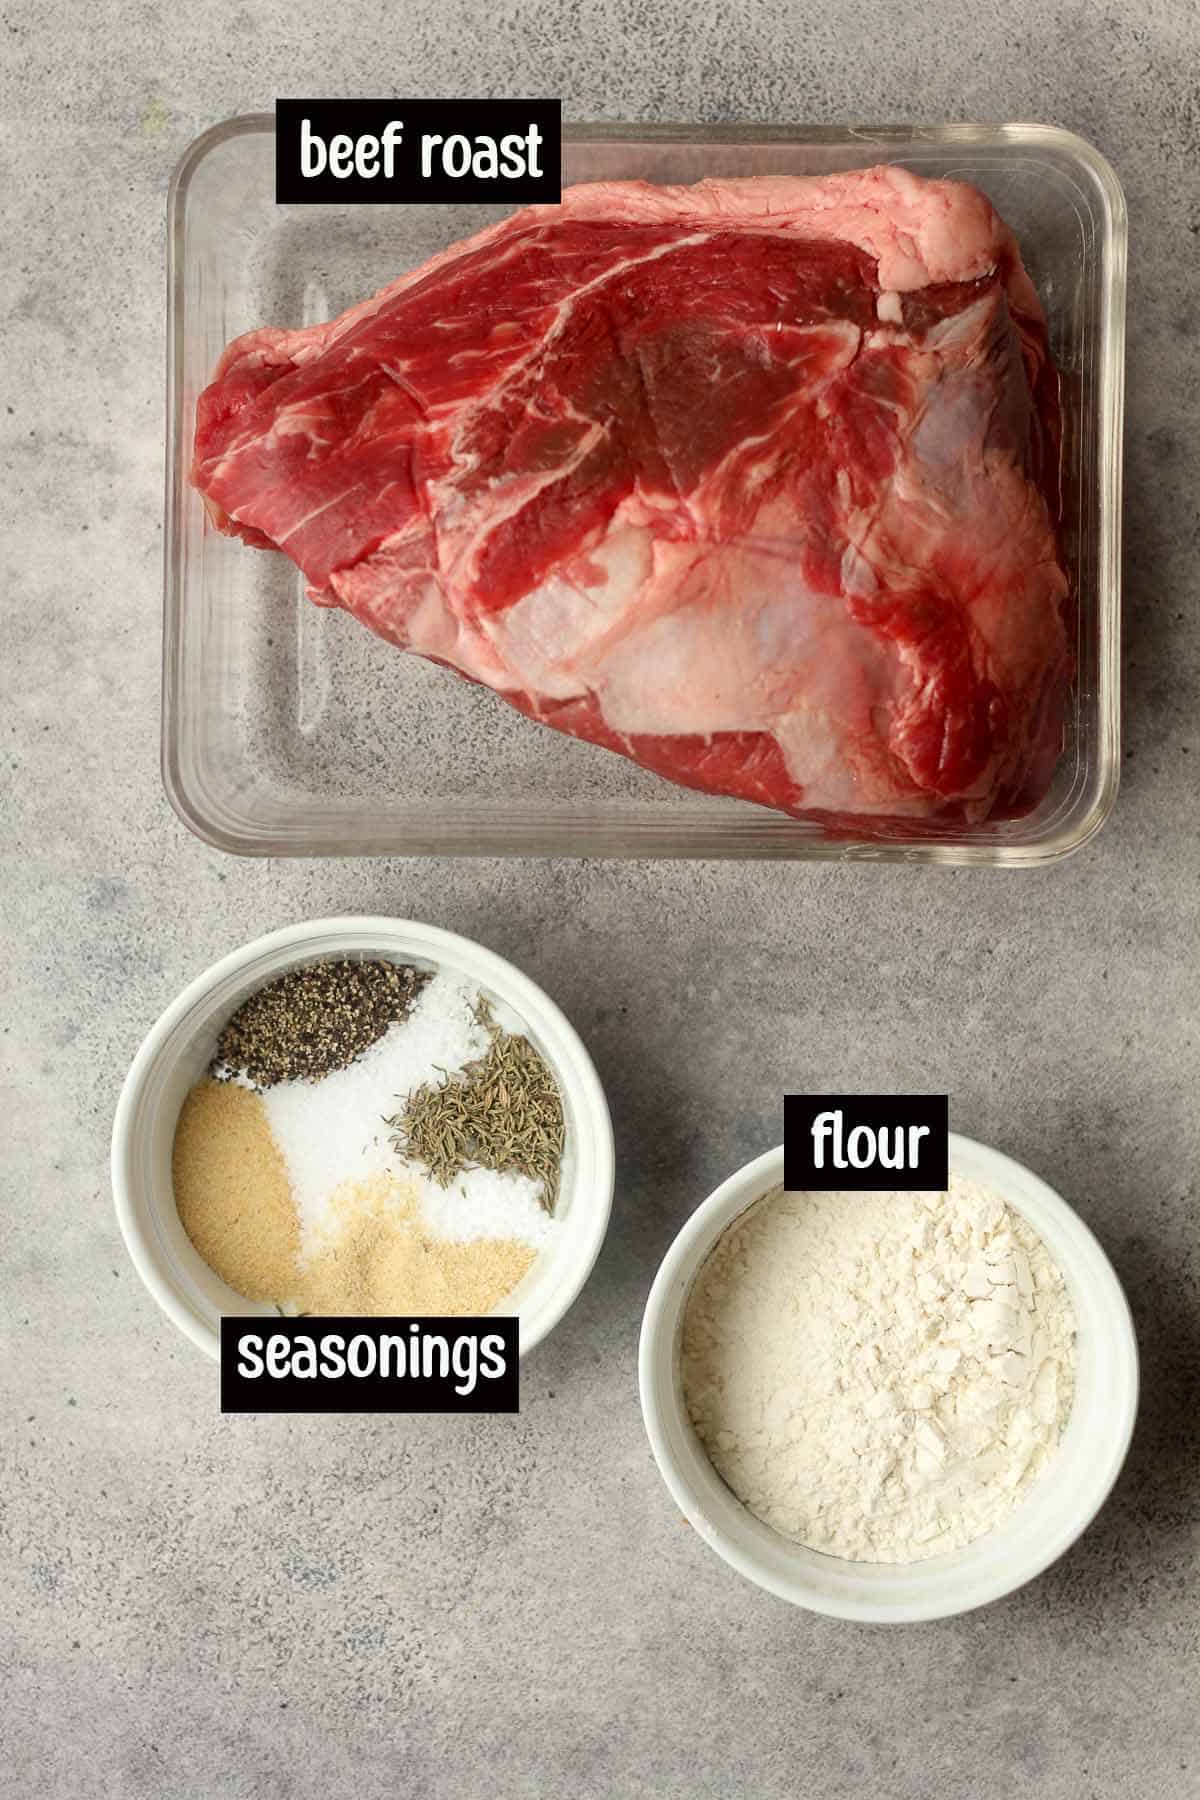 The beef ingredients for stew.